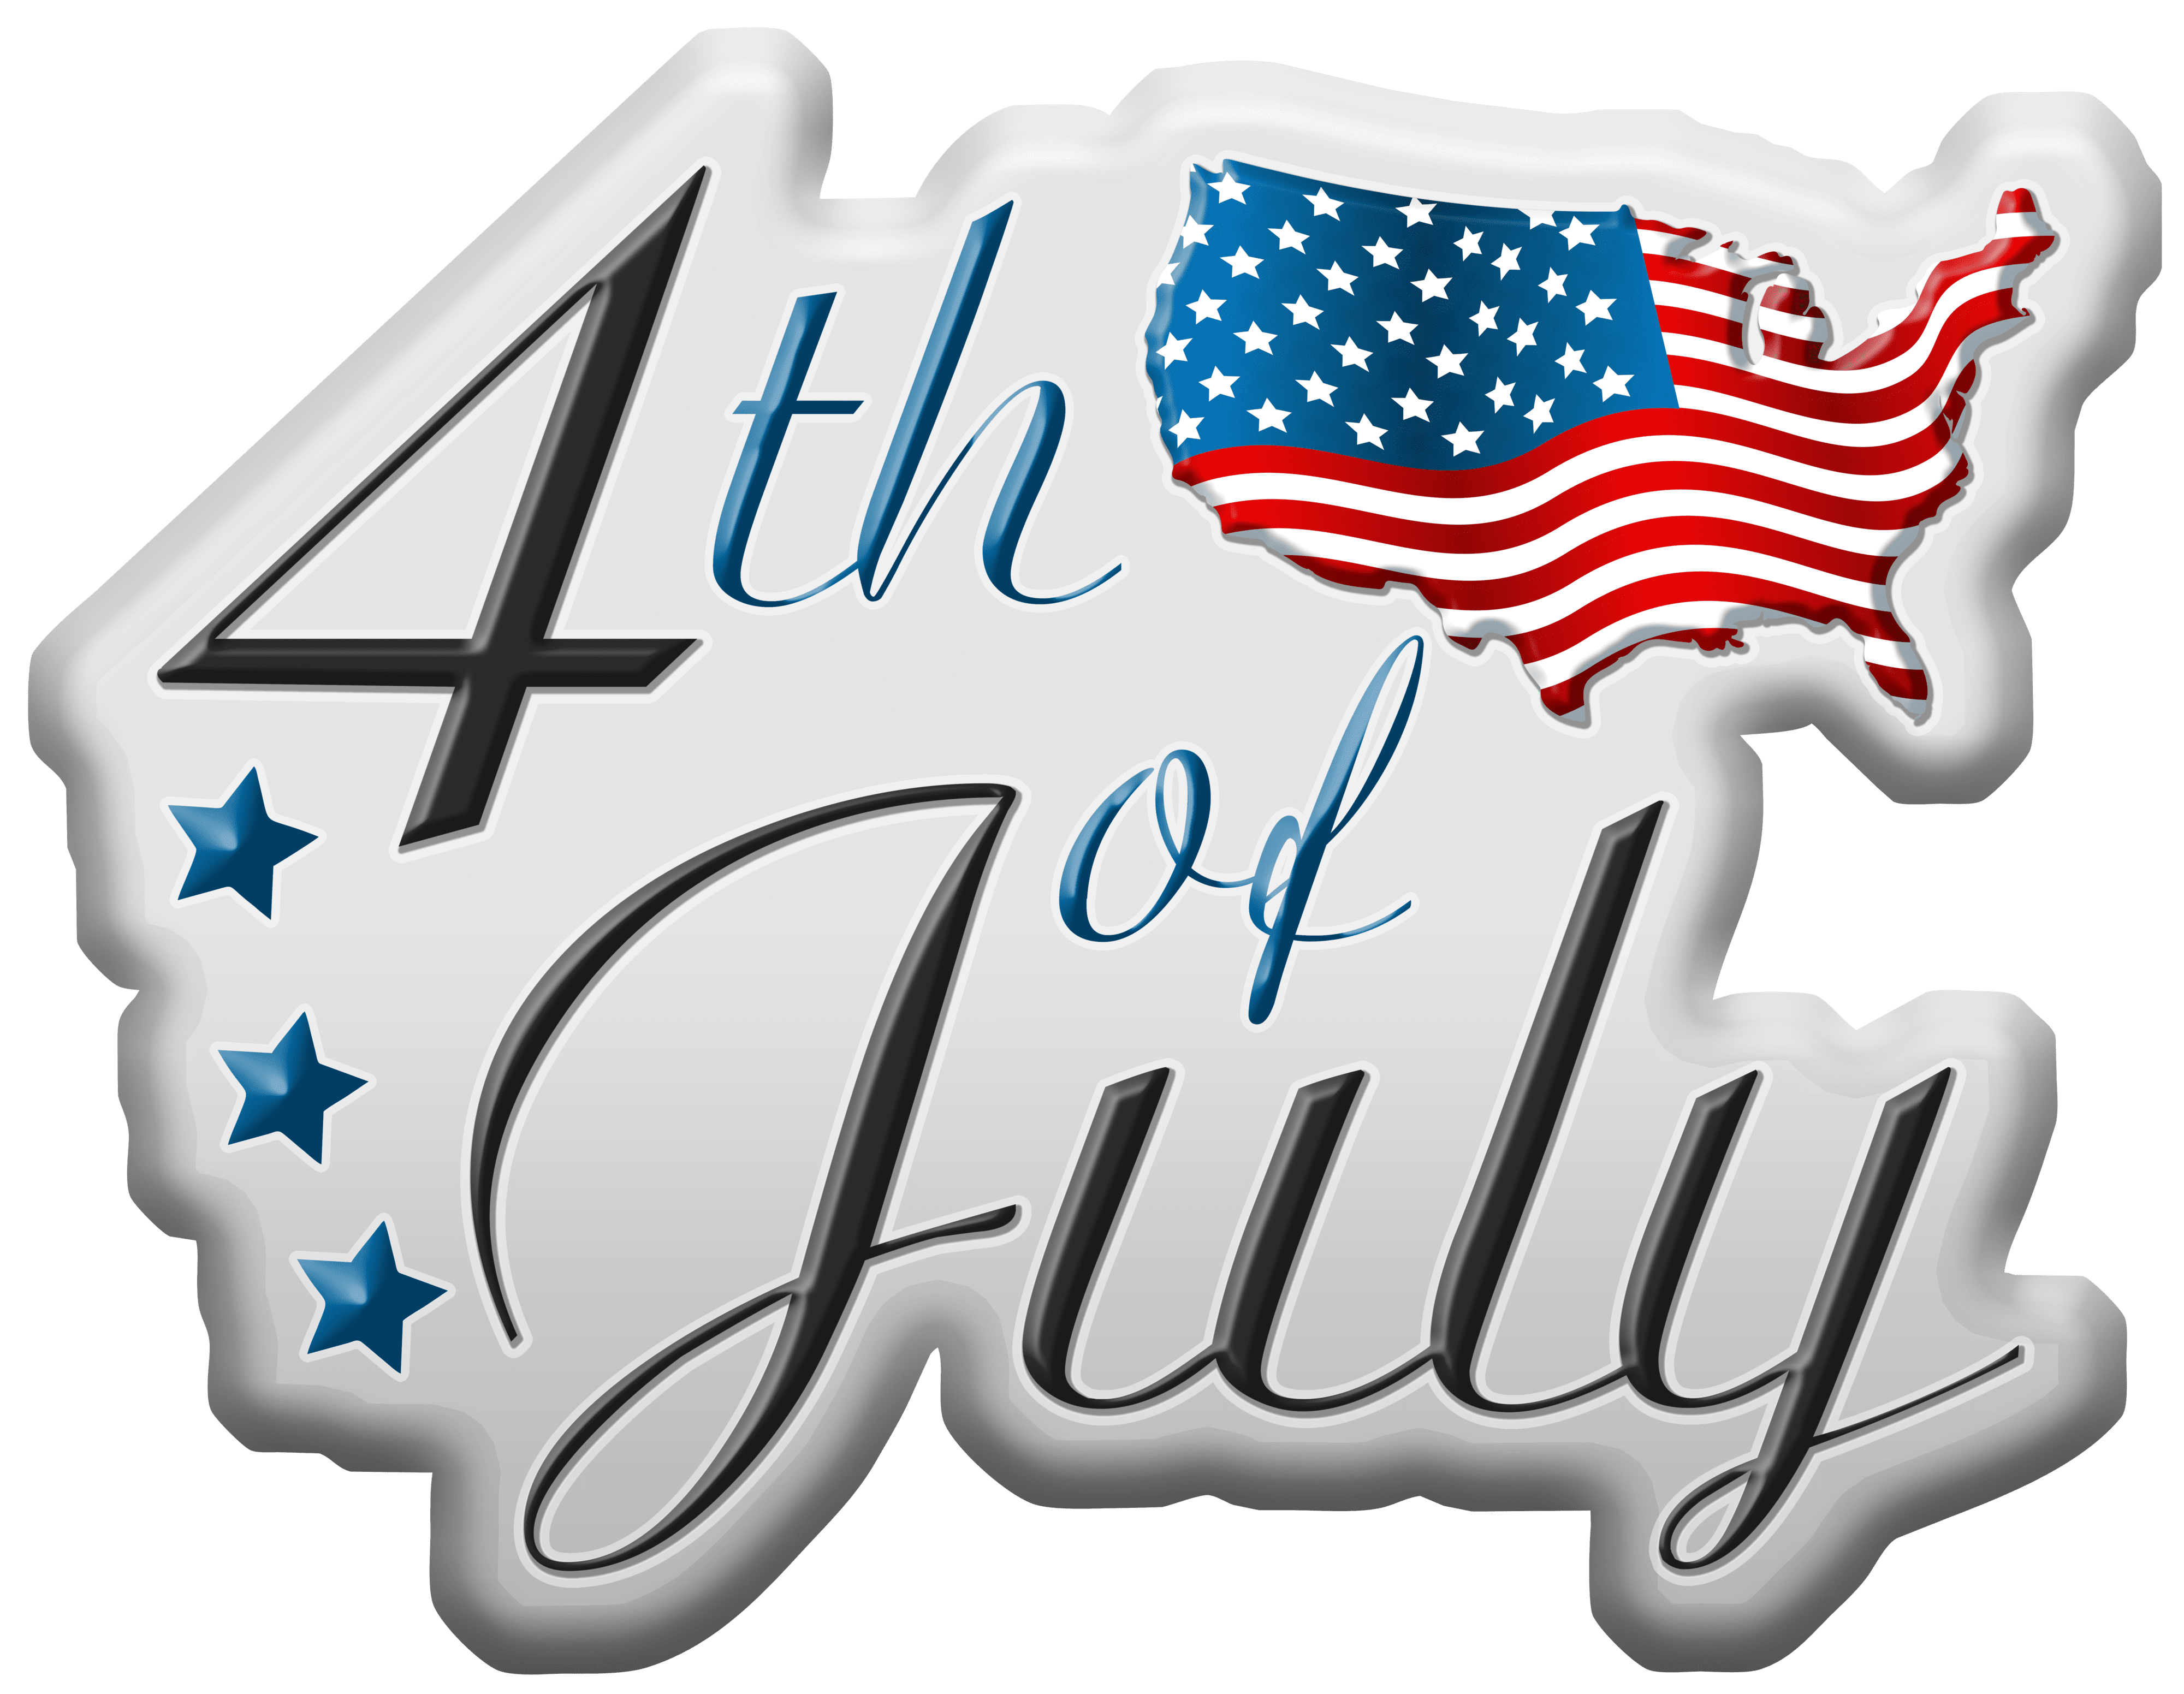 4th of July PNG Clip Art Image 435554423